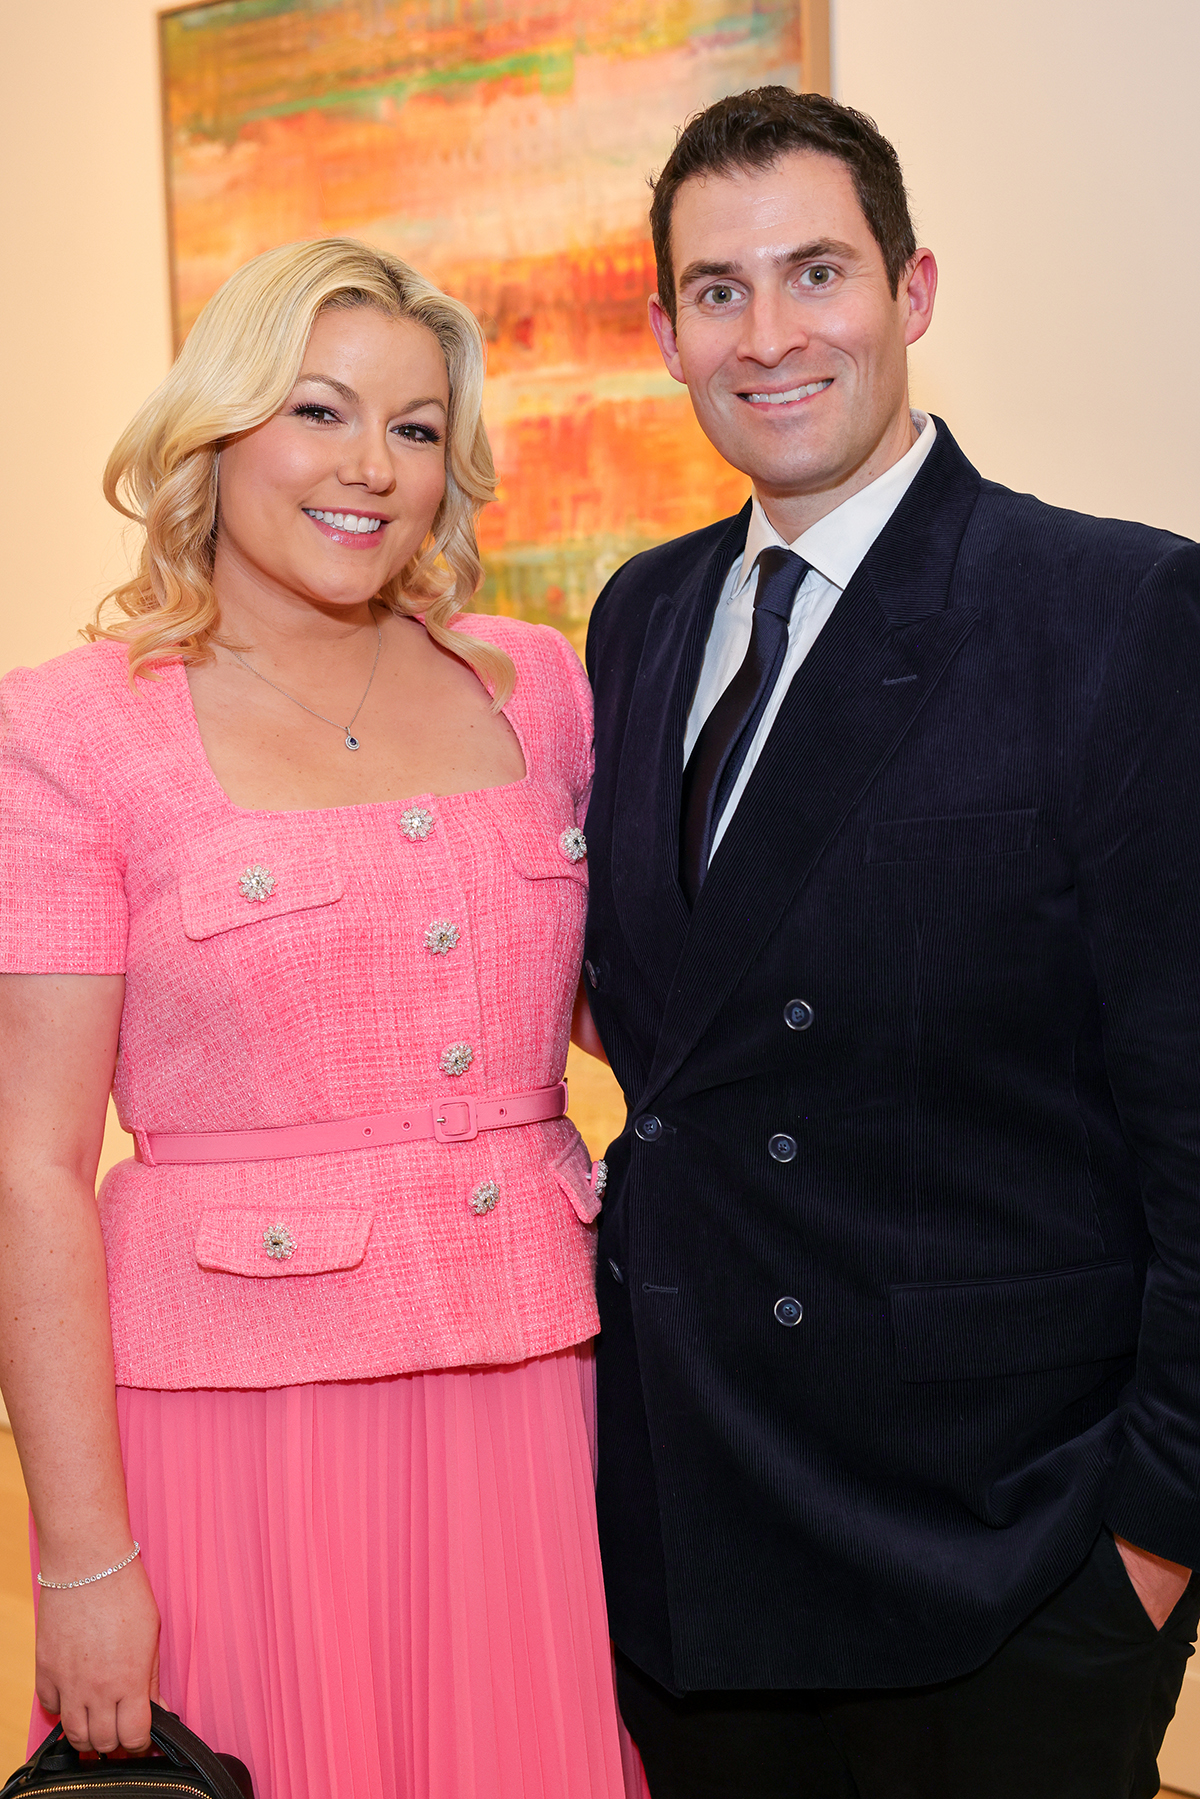 A blonde woman in a pink dress standing next to a man a black suit and tie with a white shirt